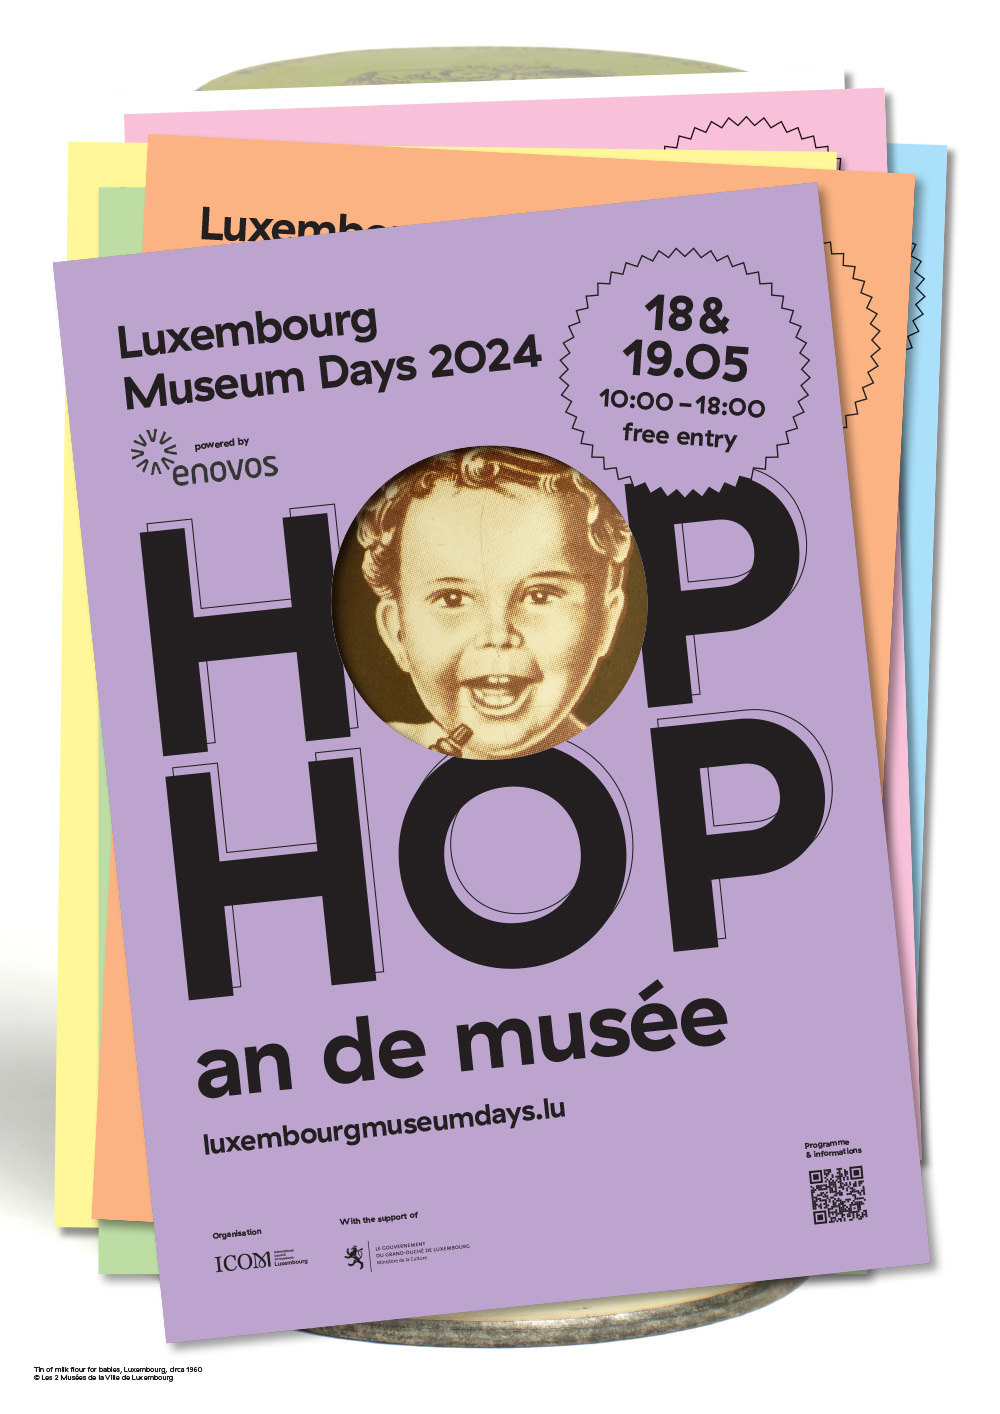 Luxembourg Museum Days 2024